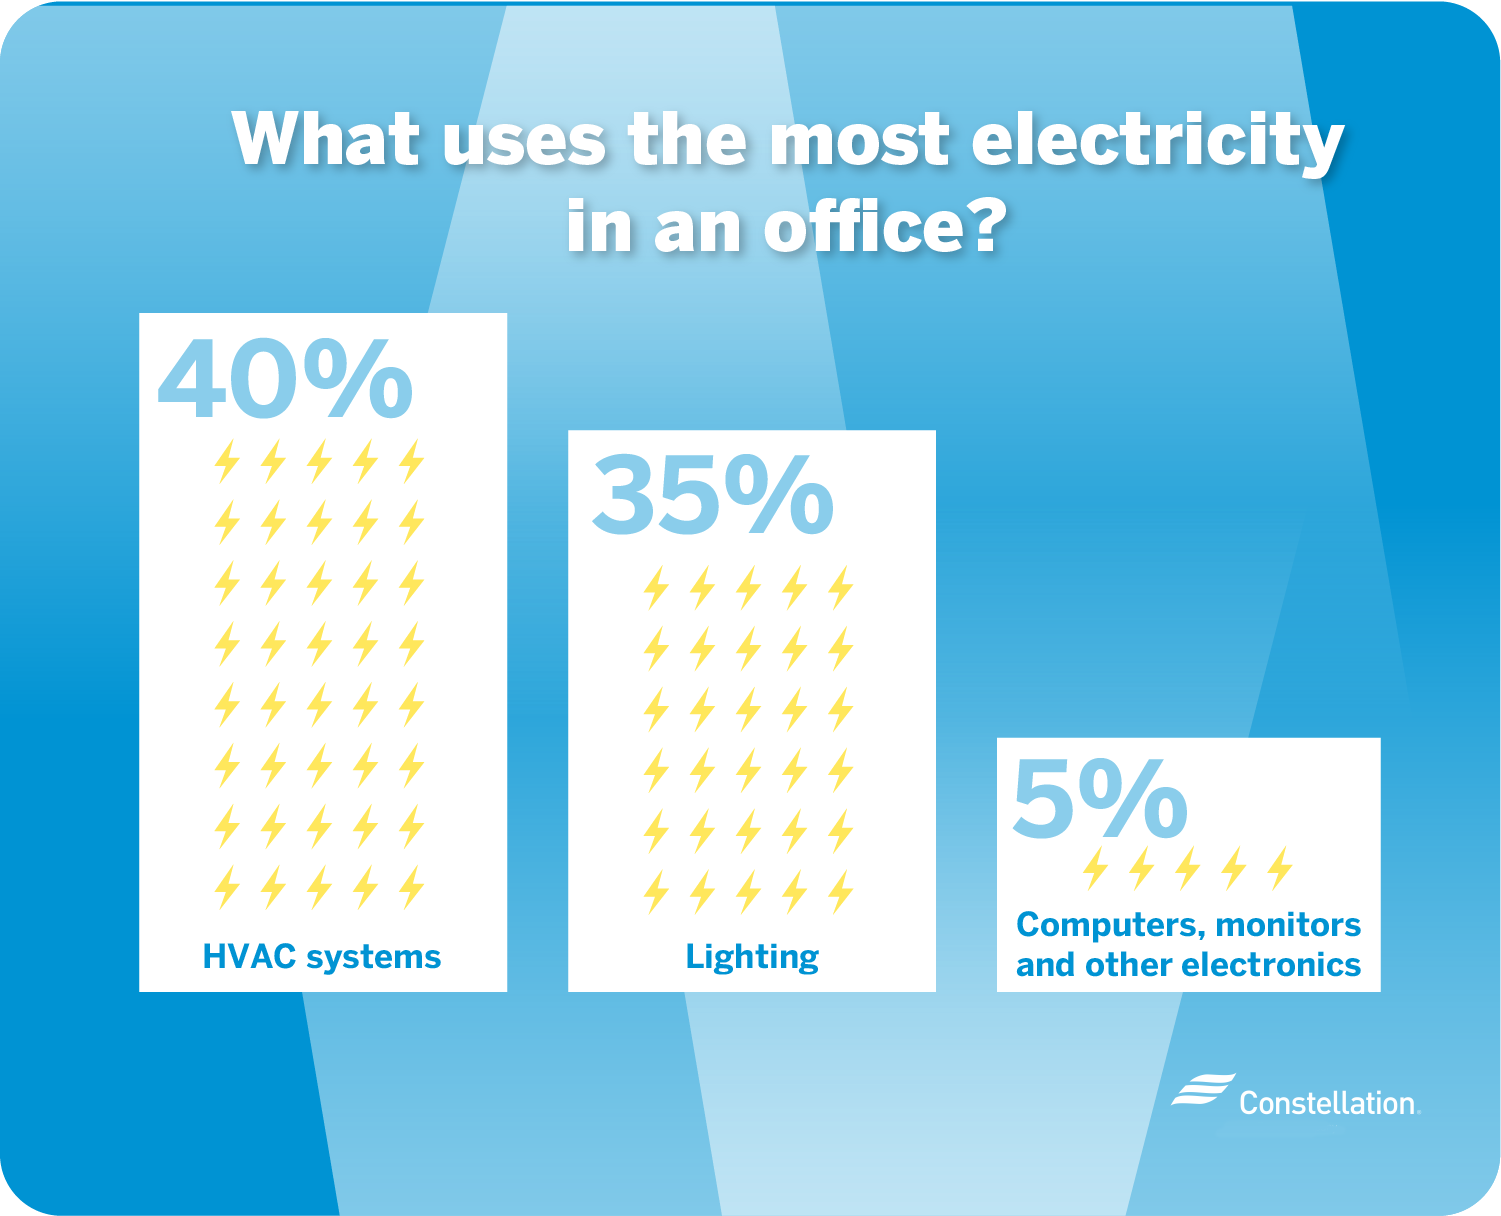 What uses the most electricity in an office?